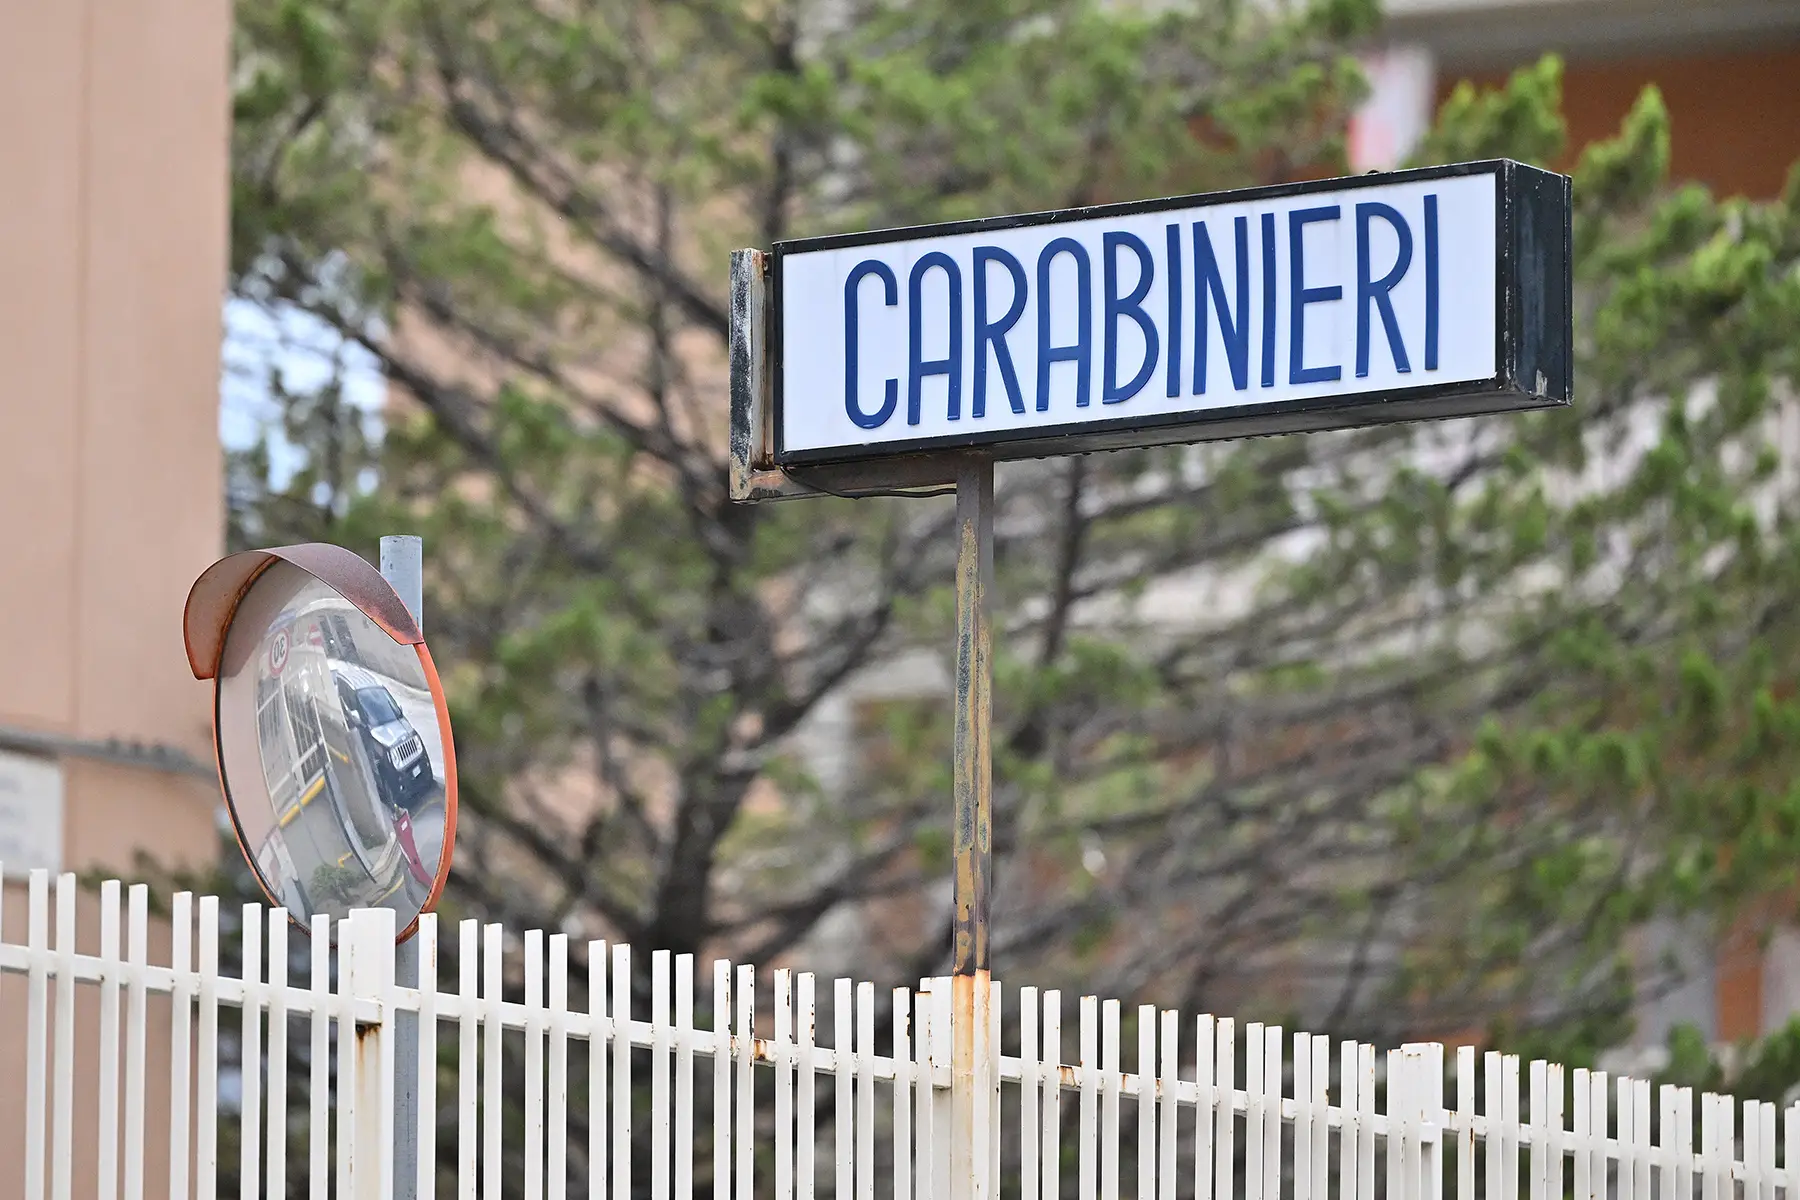 Outside a police station, a sign says 'Carabinieri'